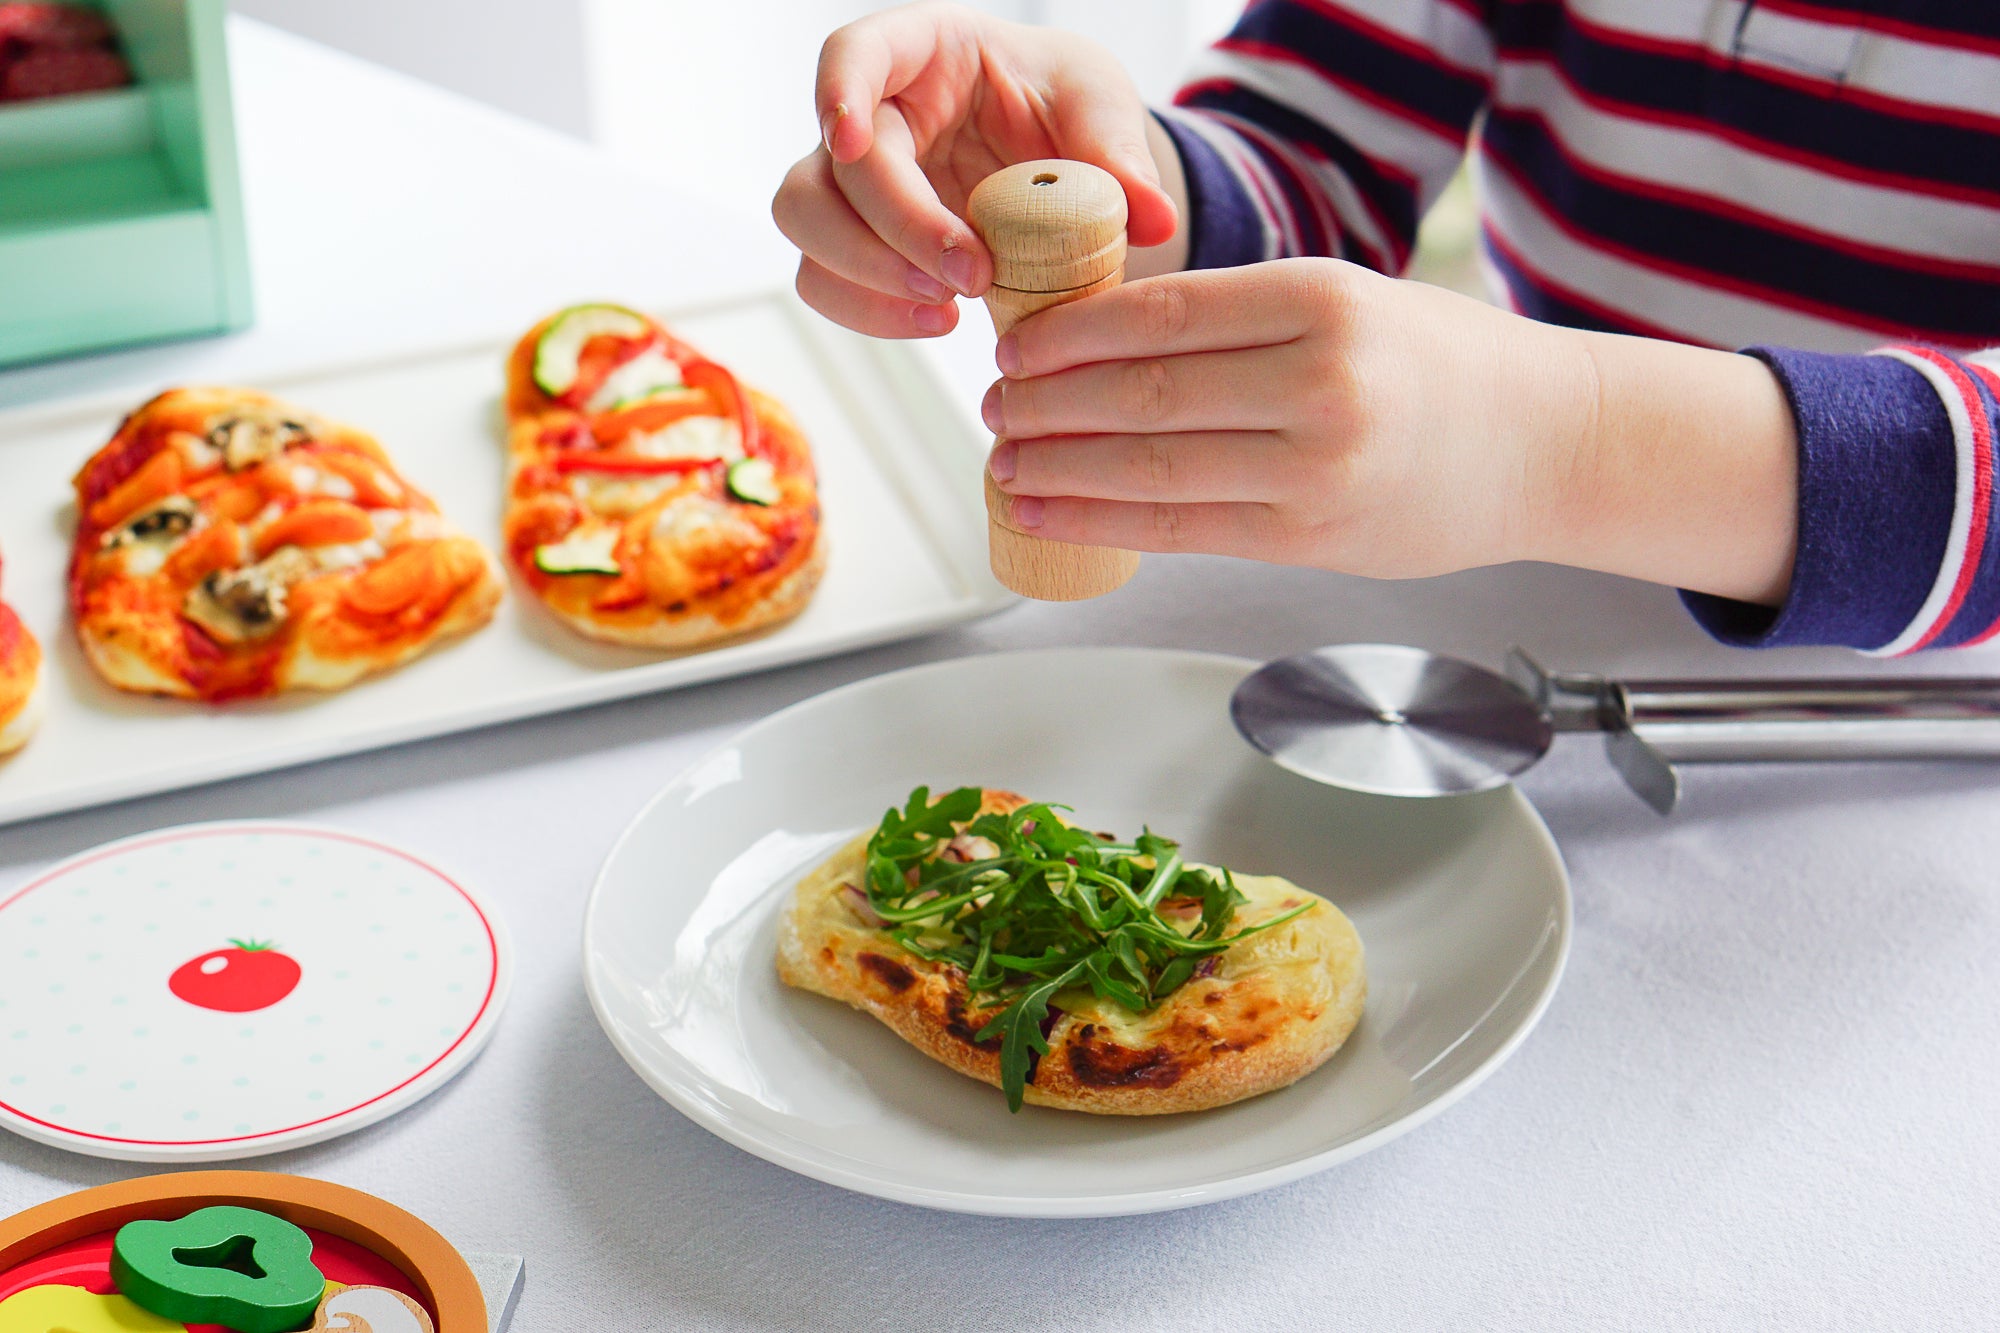 The Piccolo Play Café and five family-friendly vegetarian pizza toppings